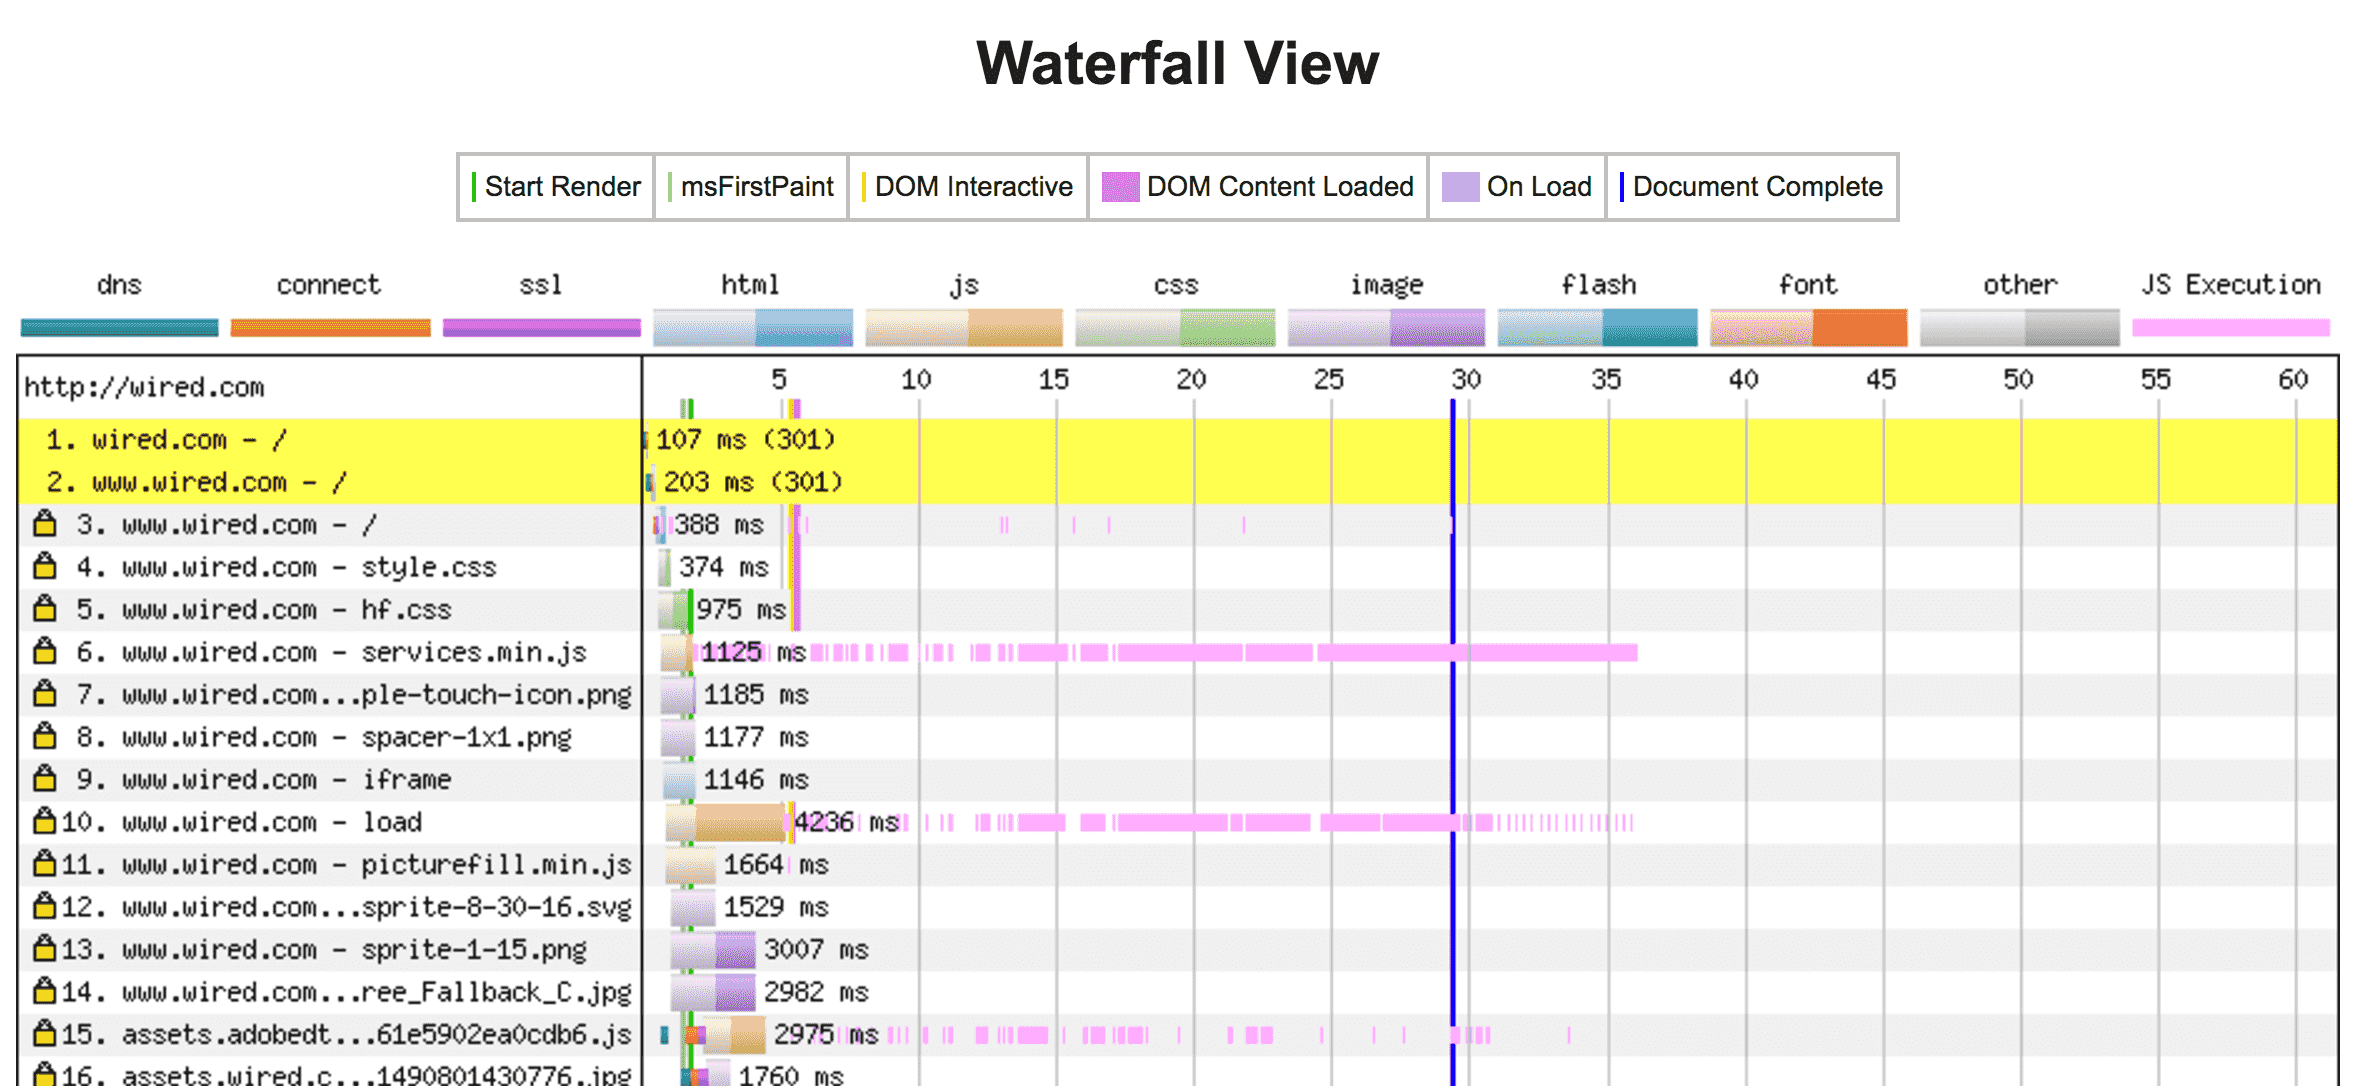 Screenshot of WebPageTest waterfall chart showing light colors in a load reflect time to first byte